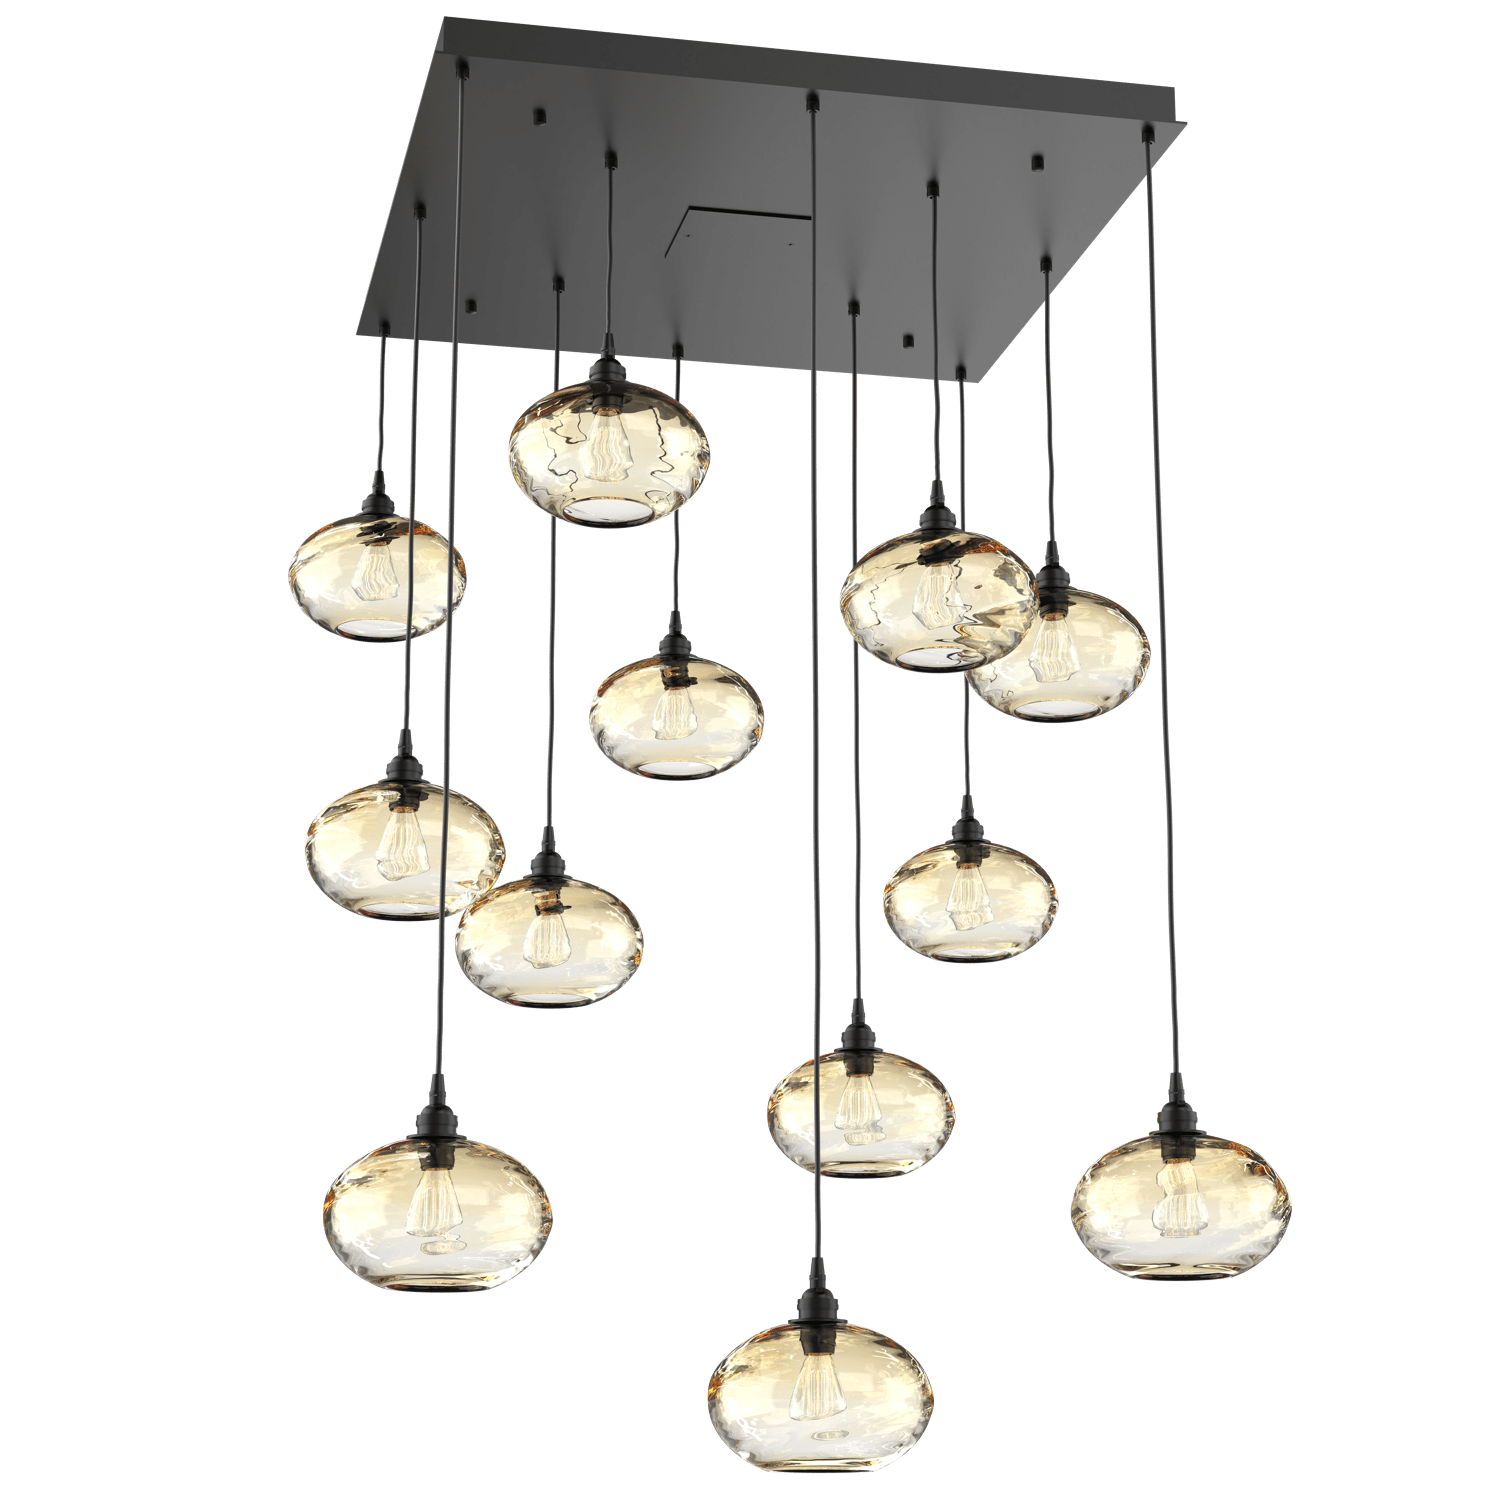 CHB0036-12-MB-OA-Hammerton-Studio-Optic-Blown-Glass-Coppa-12-light-square-pendant-chandelier-with-matte-black-finish-and-optic-amber-blown-glass-shades-and-incandescent-lamping